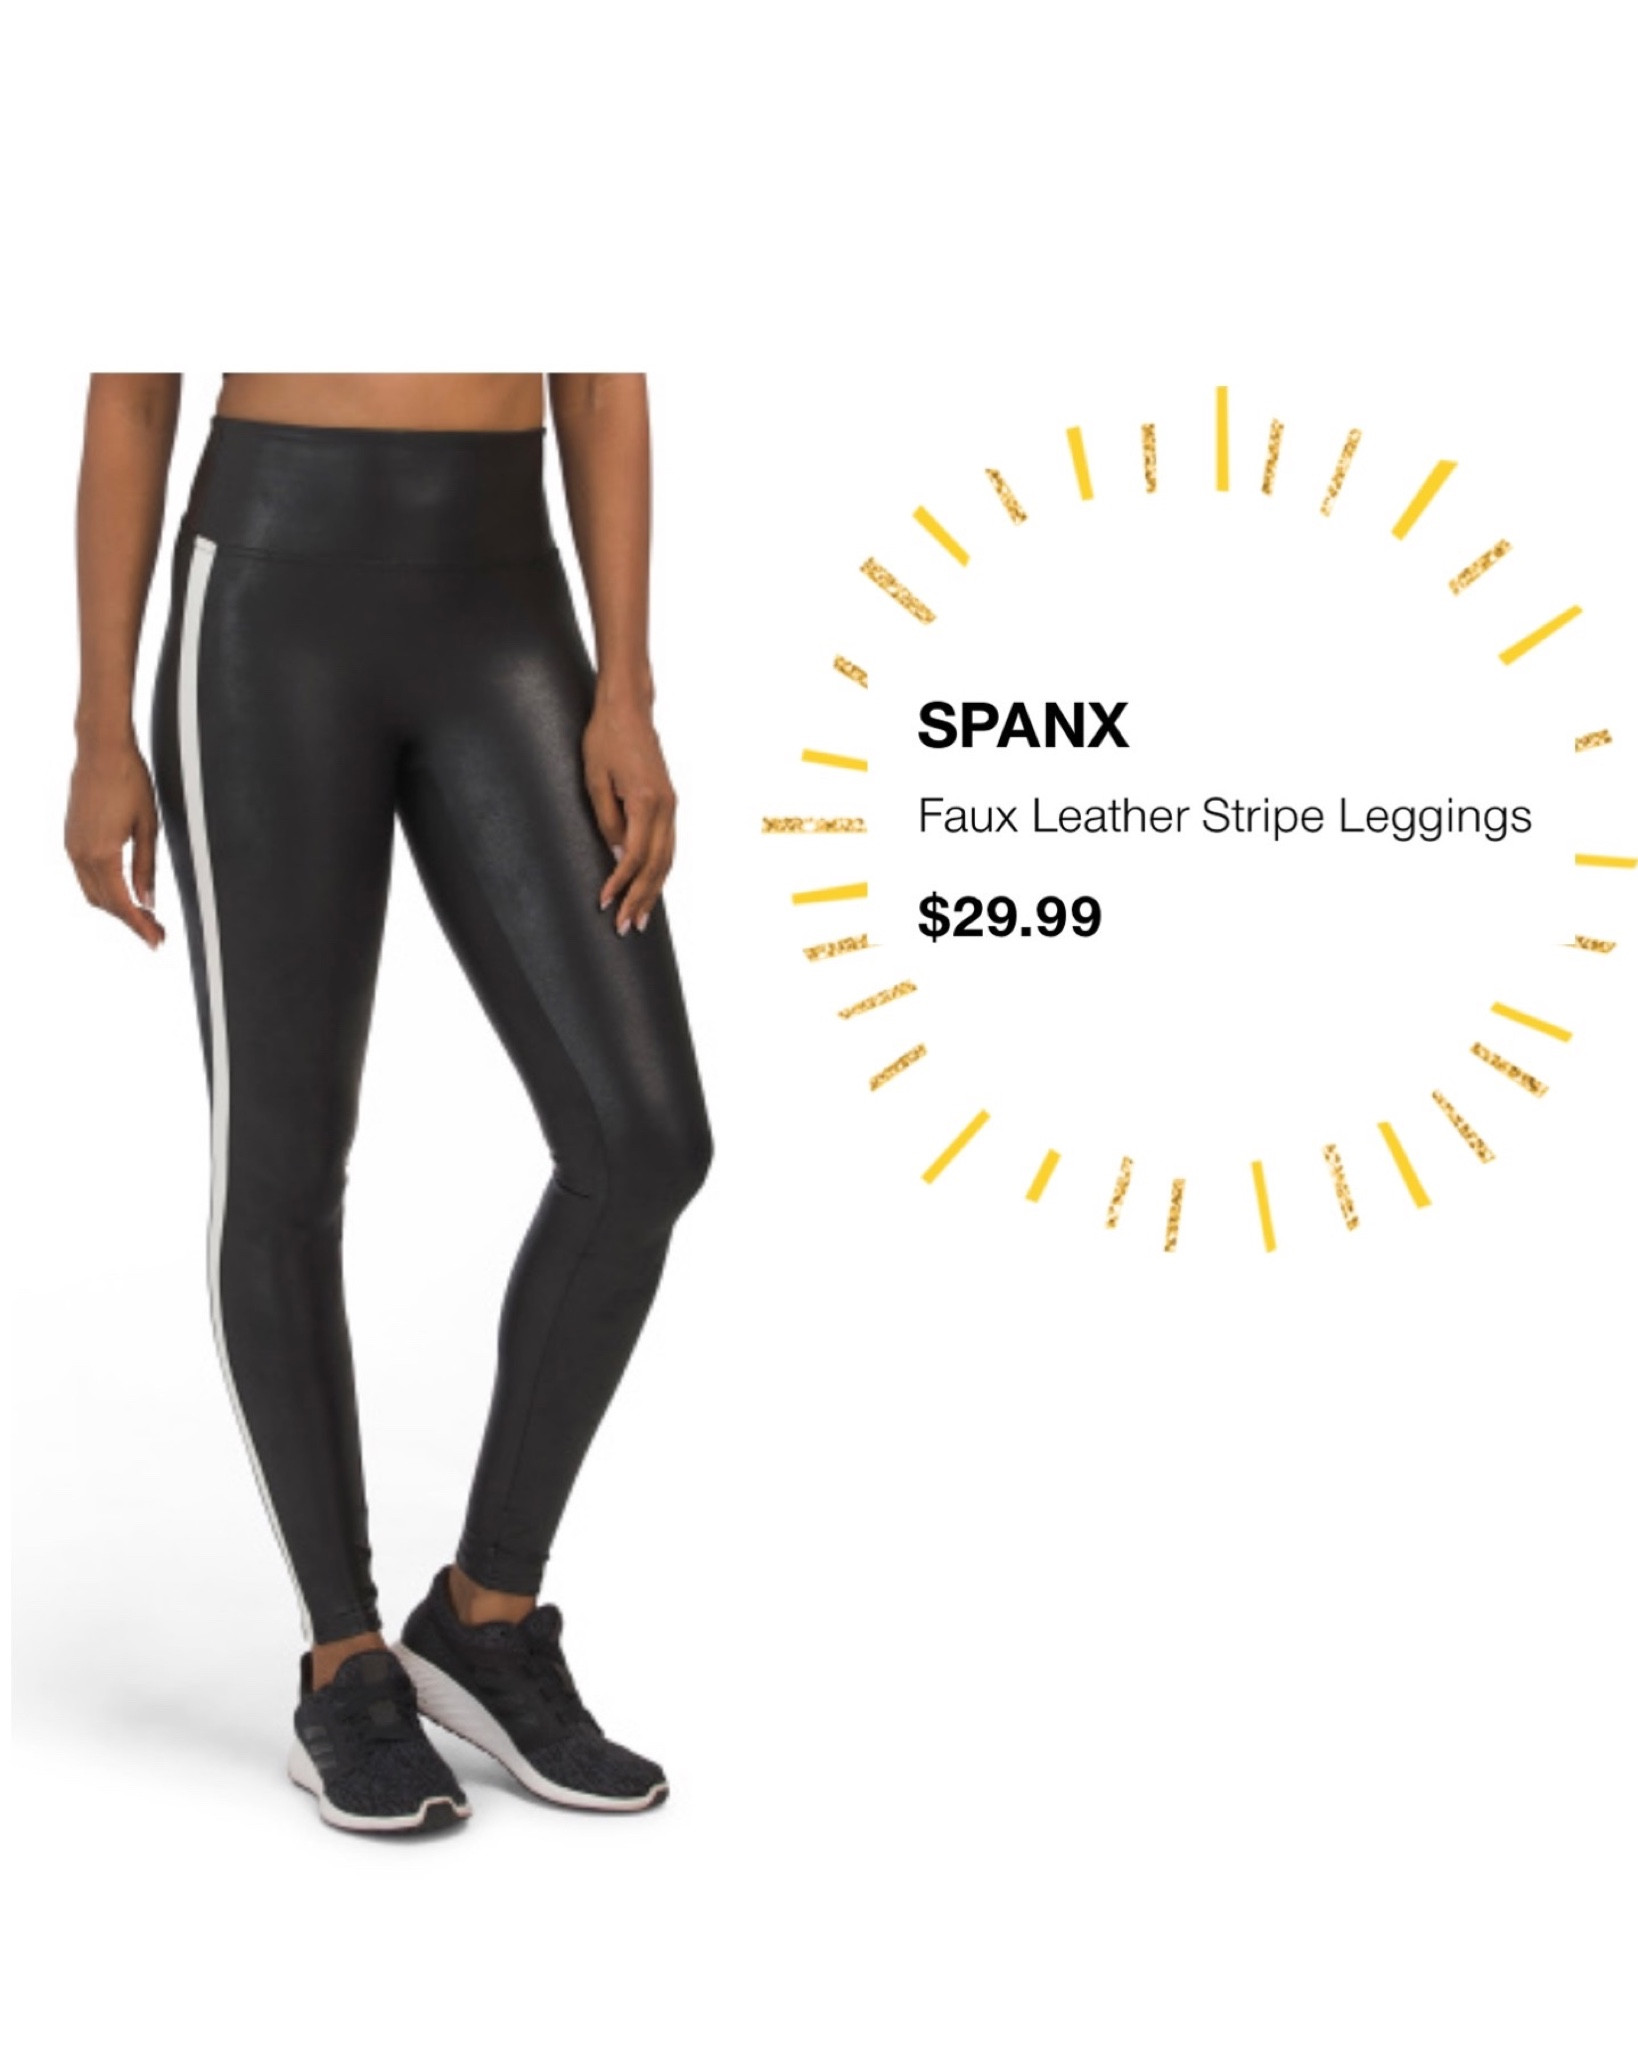 SPANX Black Faux Leather Leggings With White Stripe up The Side